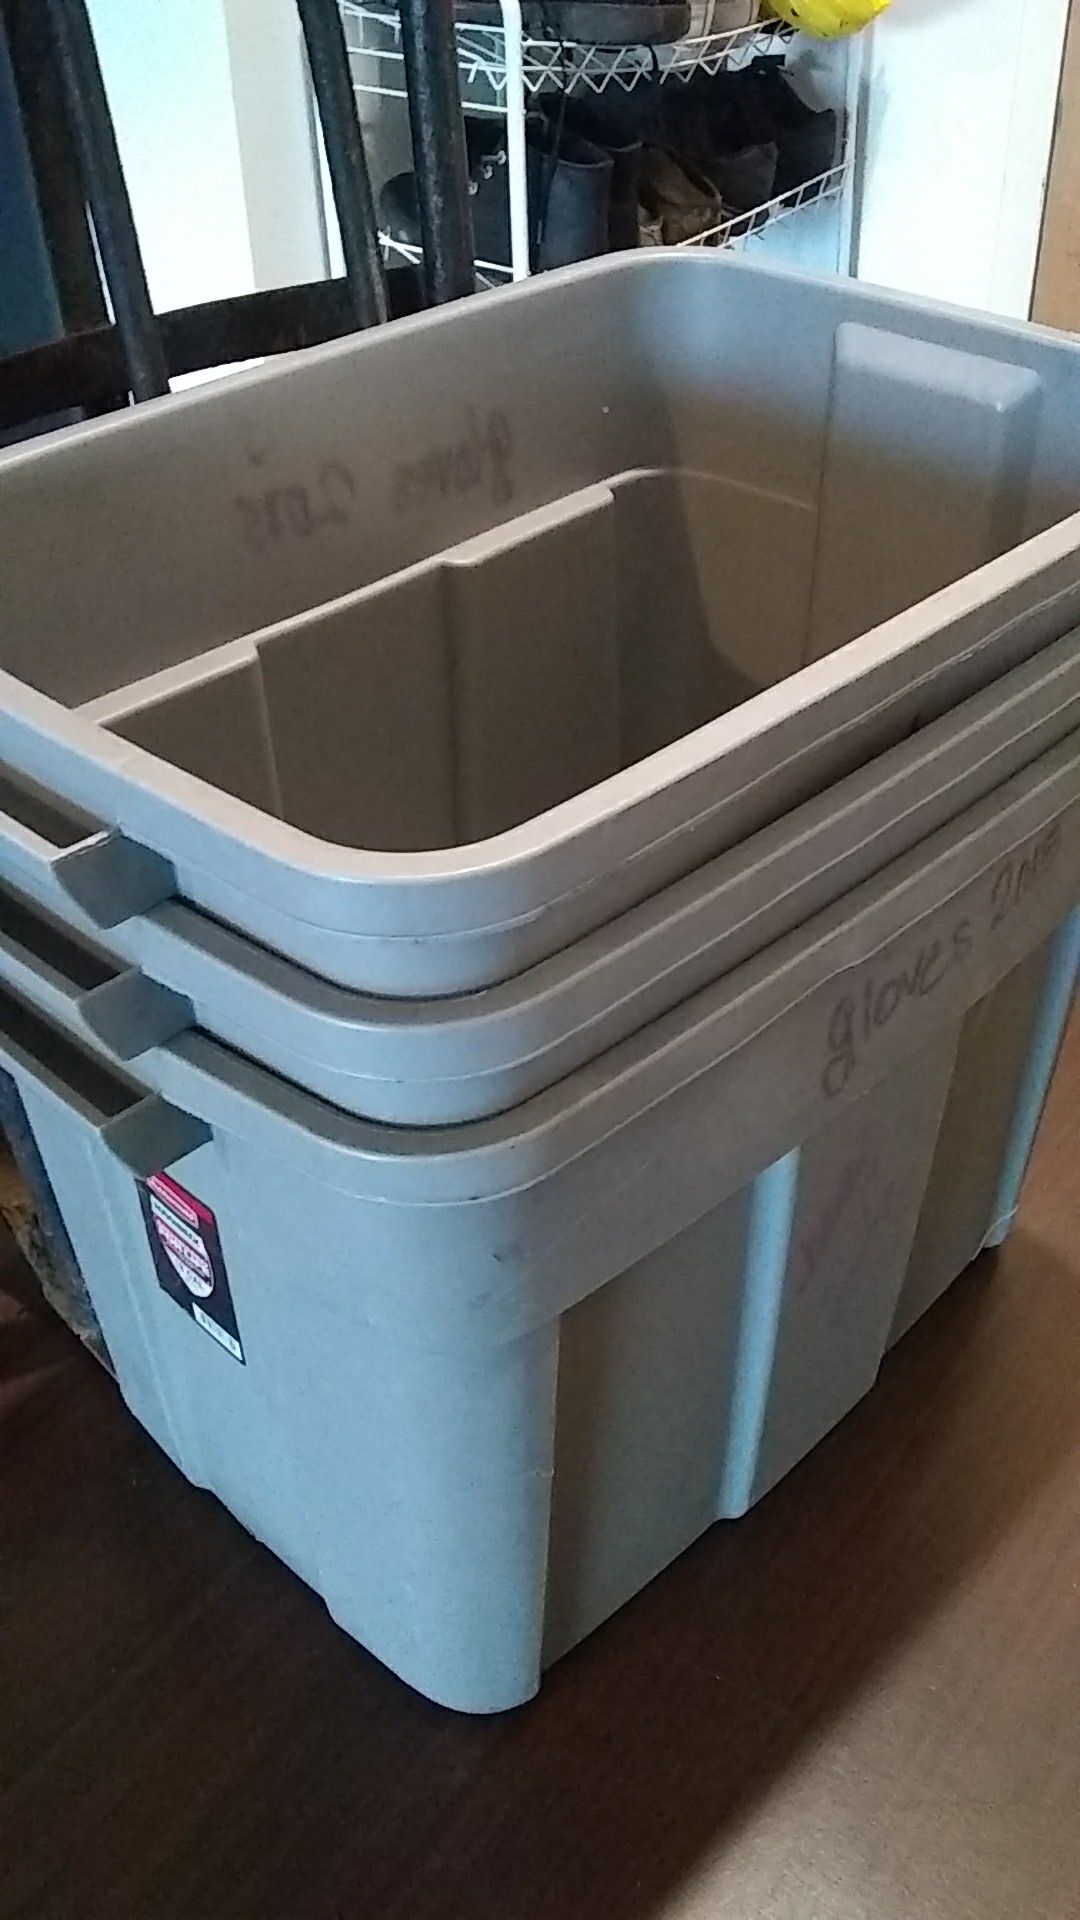 Storage containers, rubbermaid 18 gallon